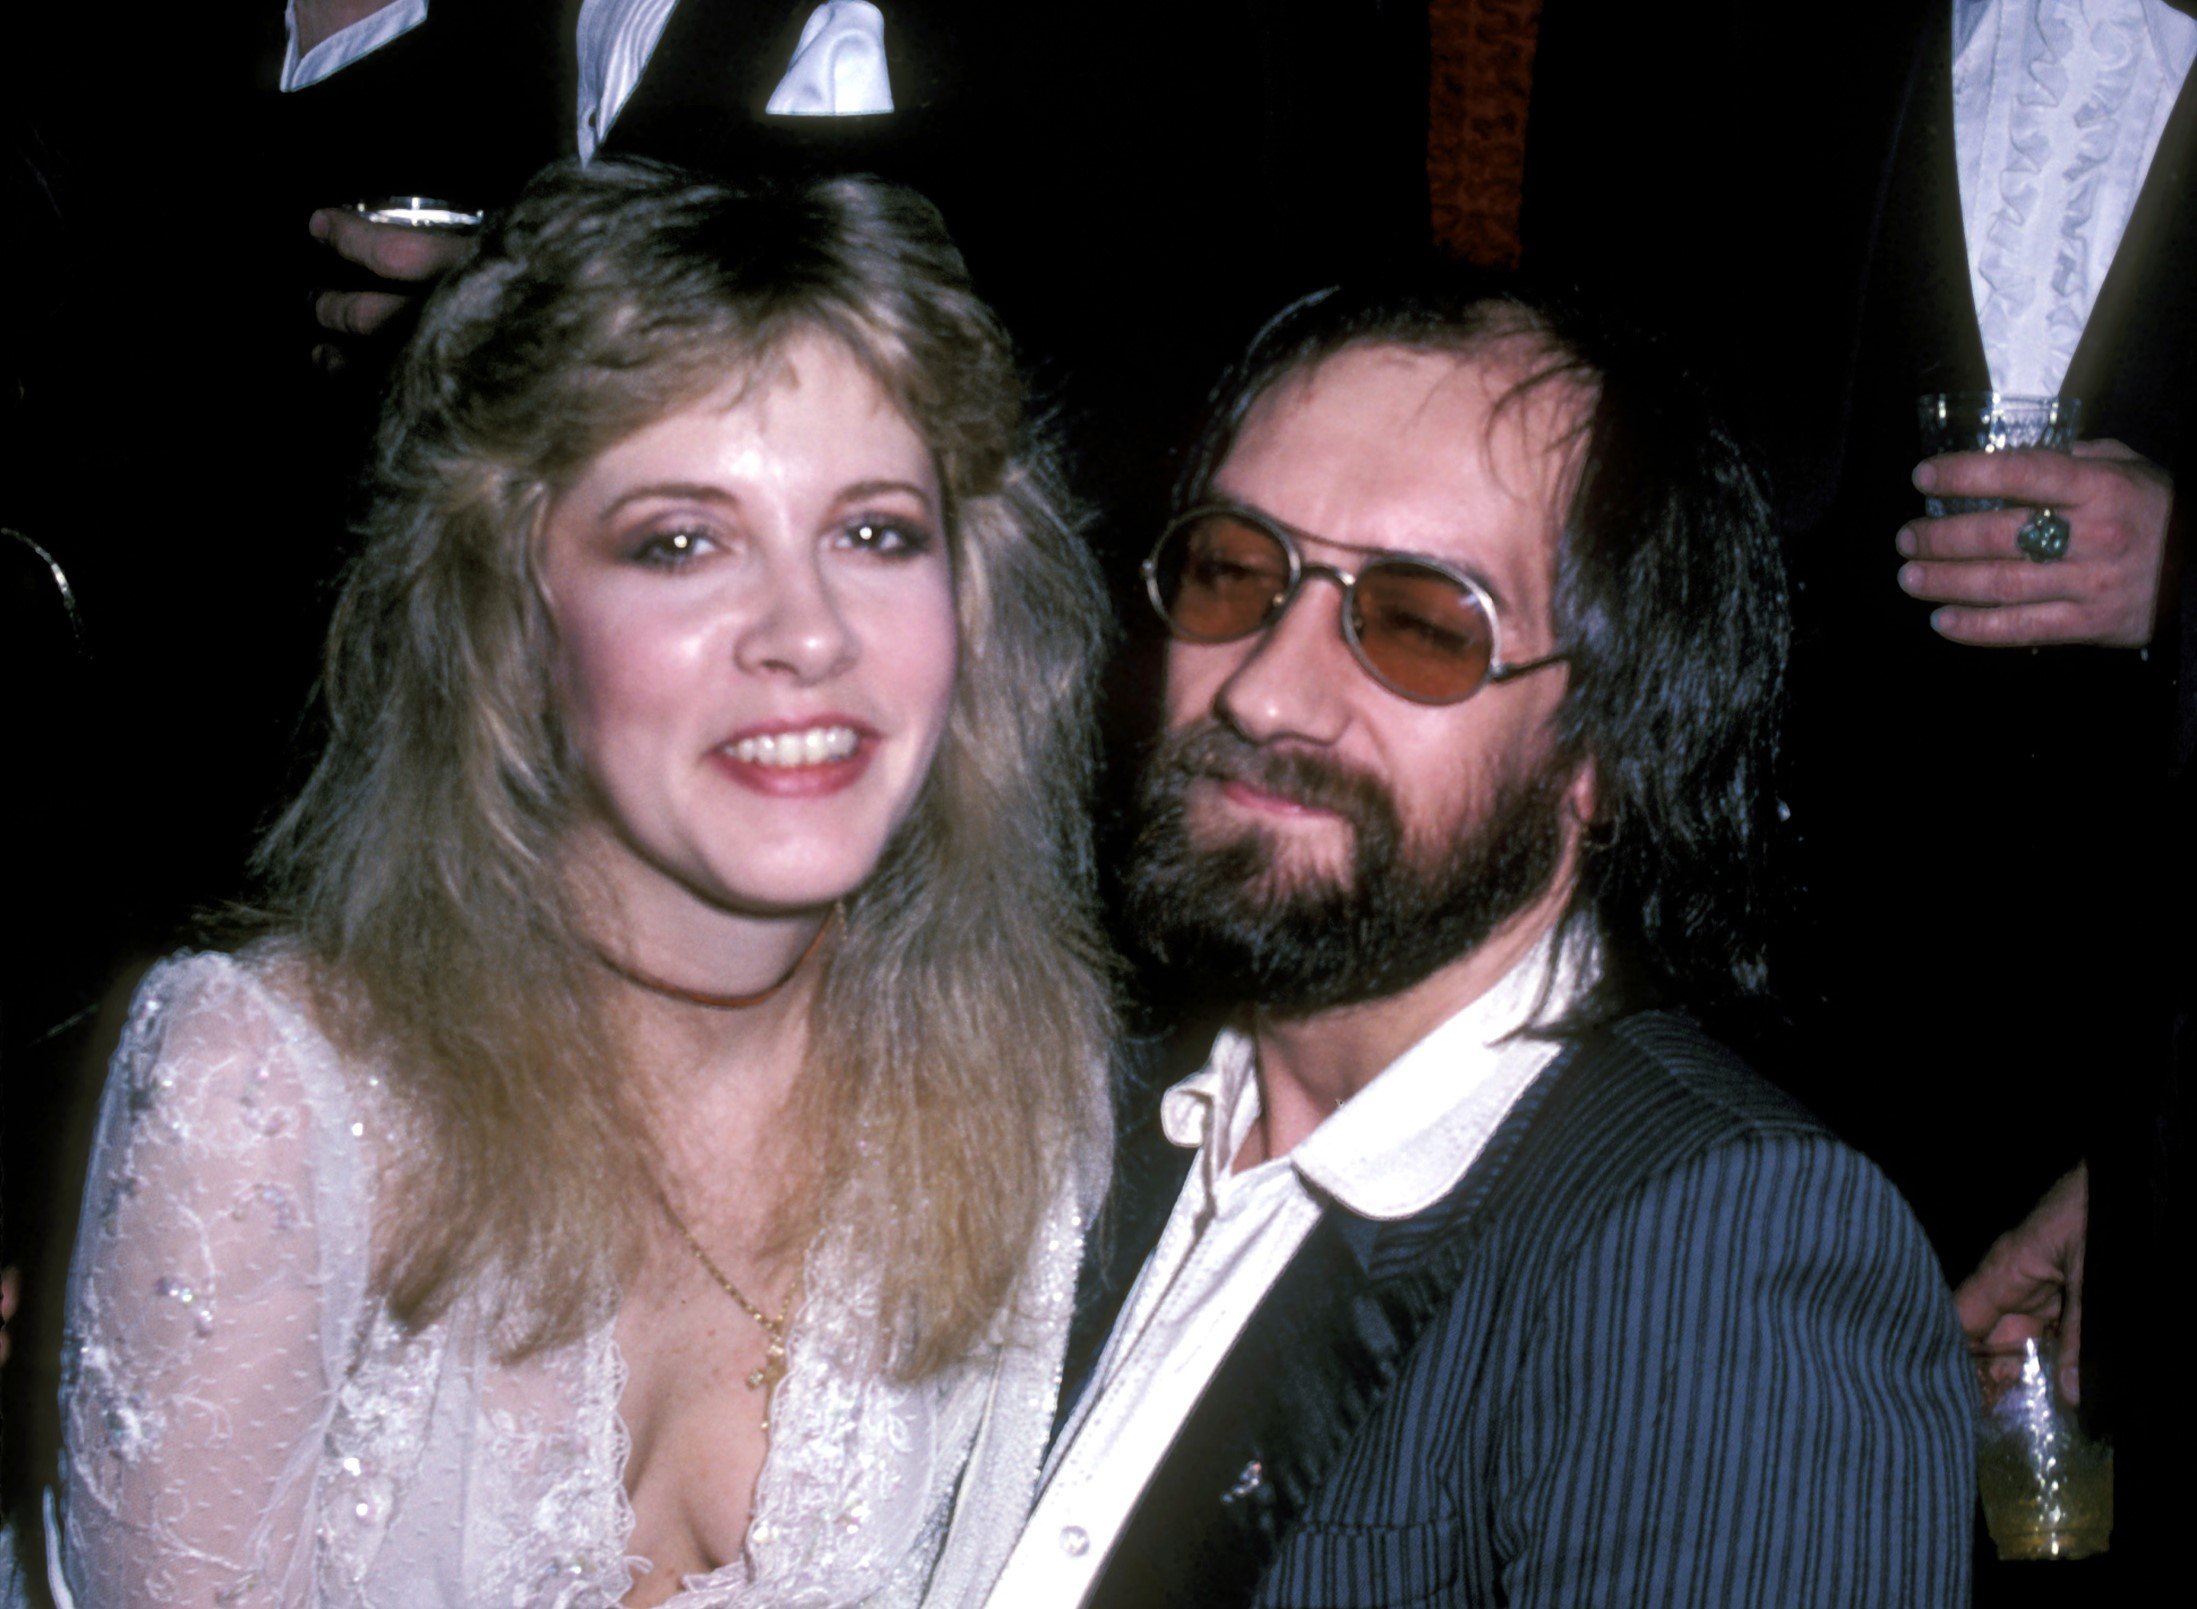 Stevie Nicks wears a white dress and sits on Mick Fleetwood's lap. He wears sunglasses.